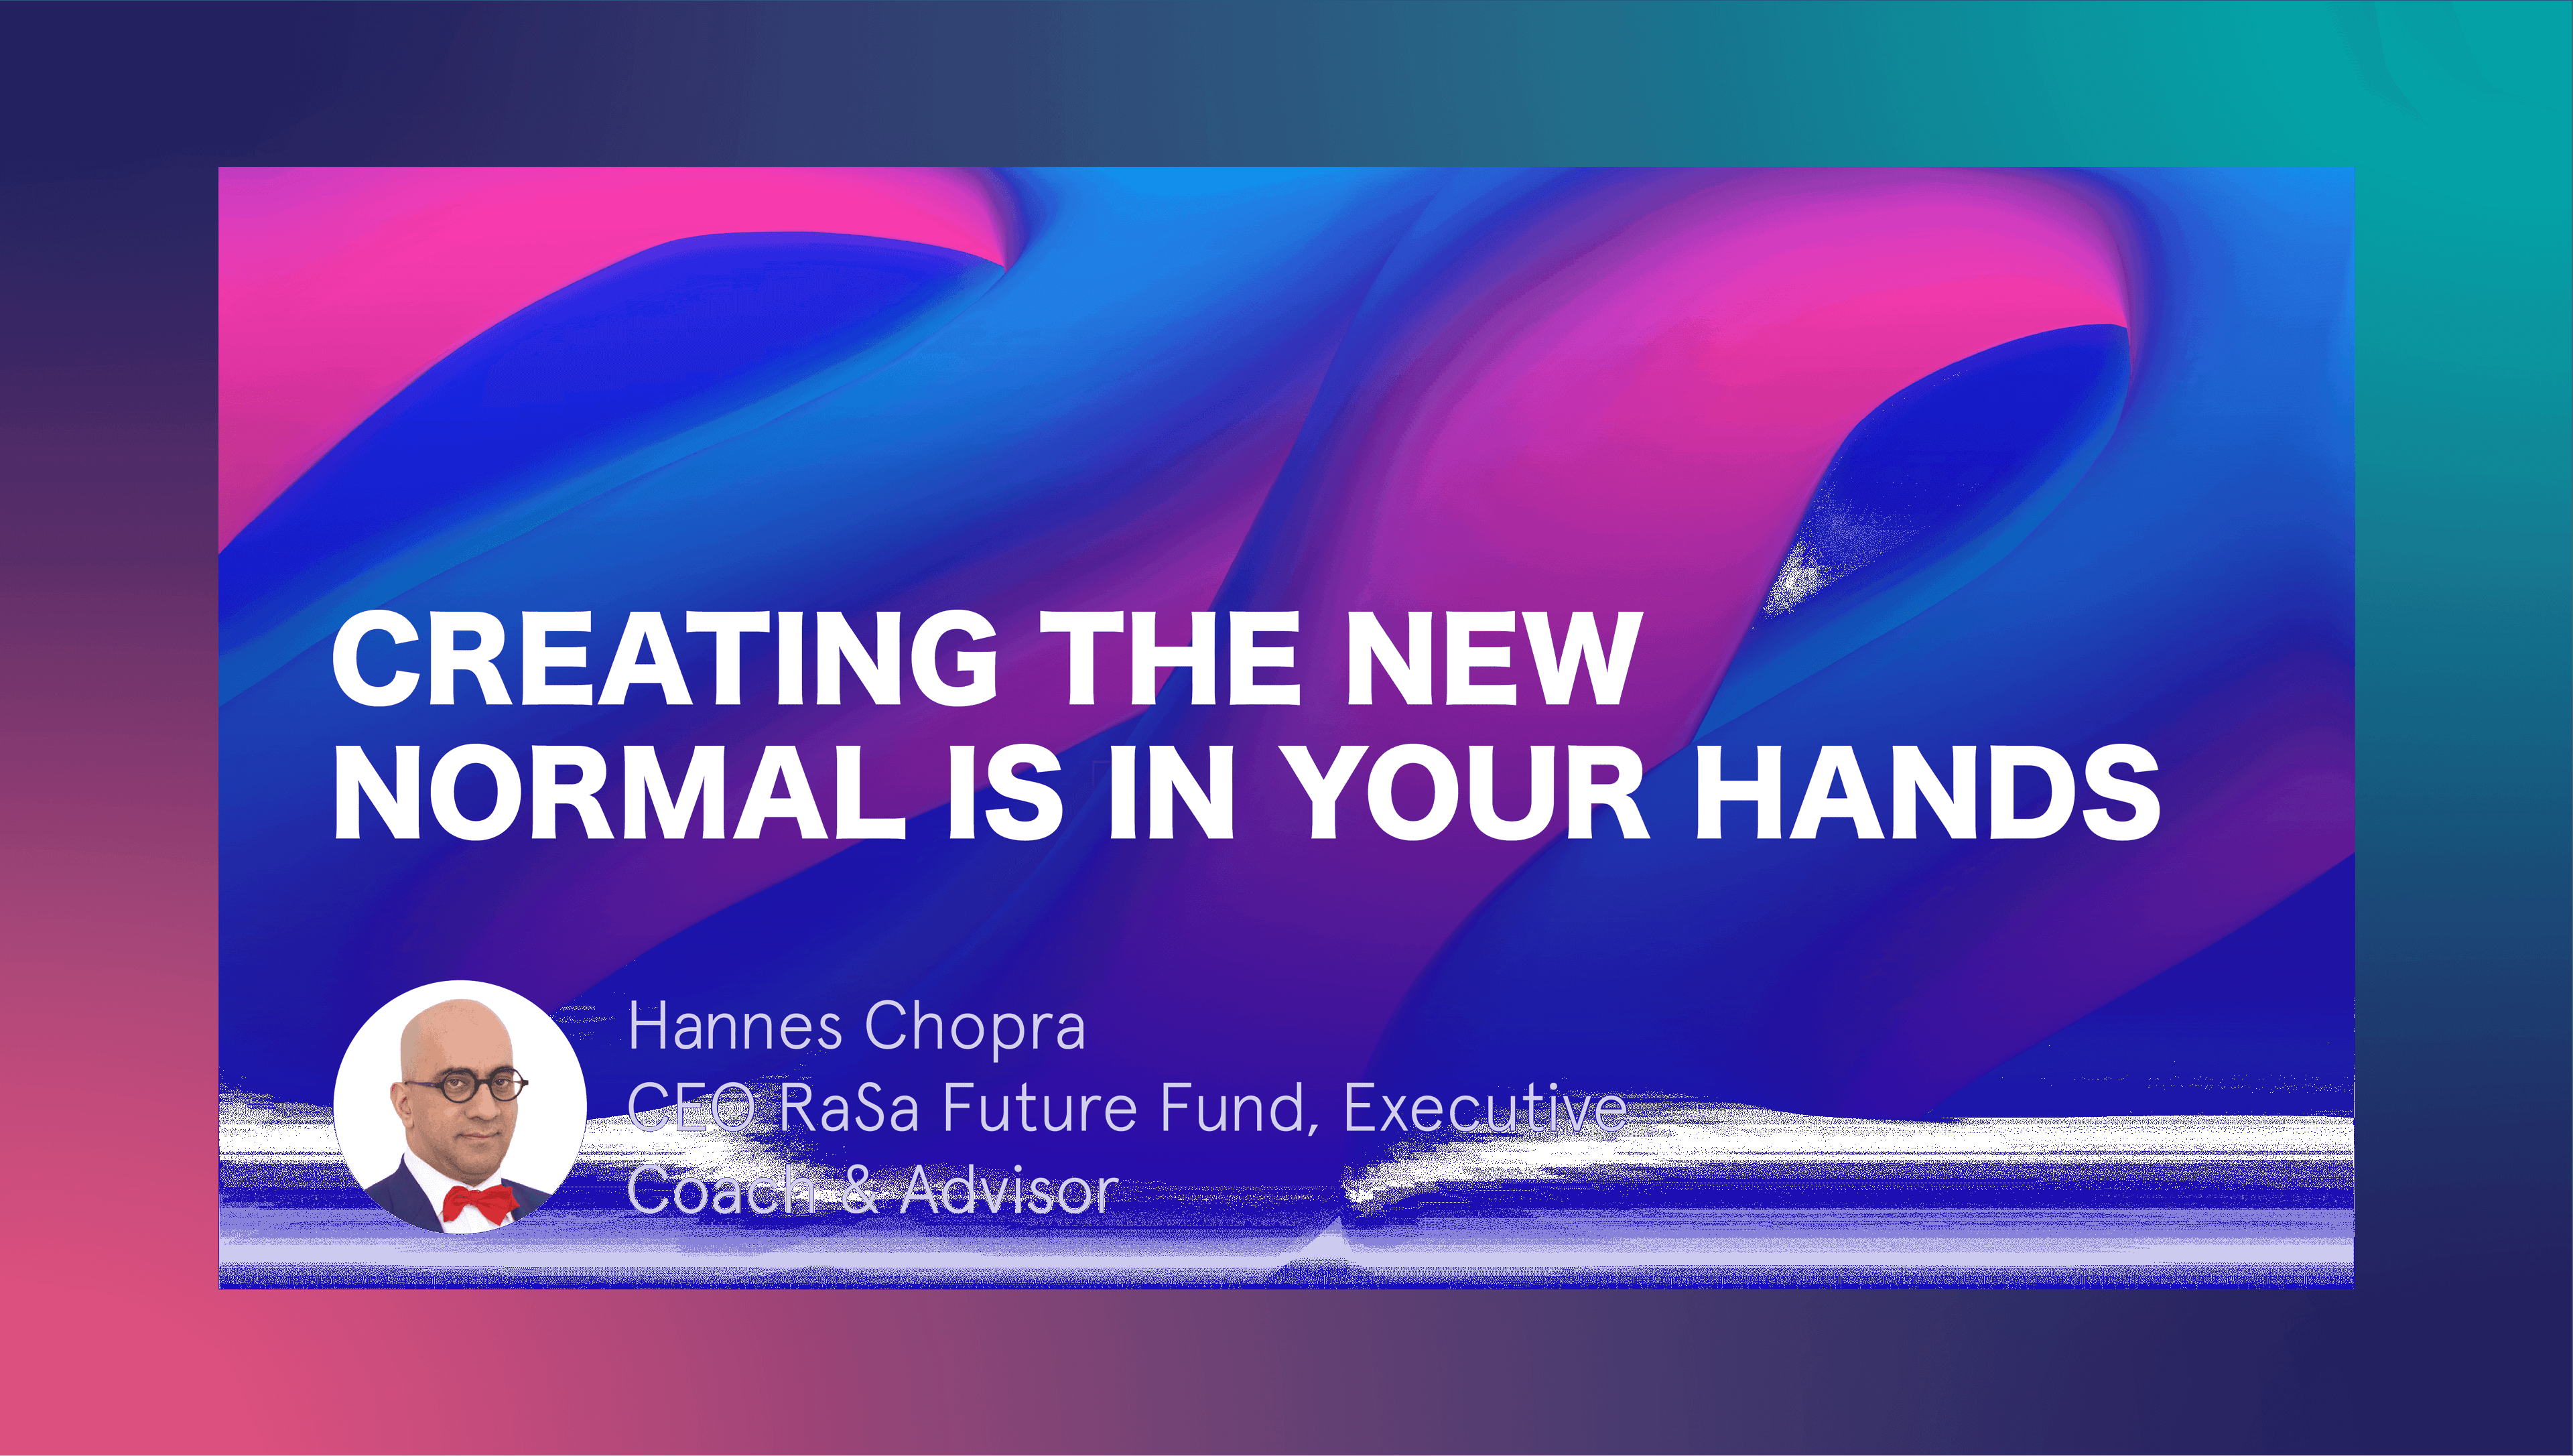 Creating the new normal is in your hands